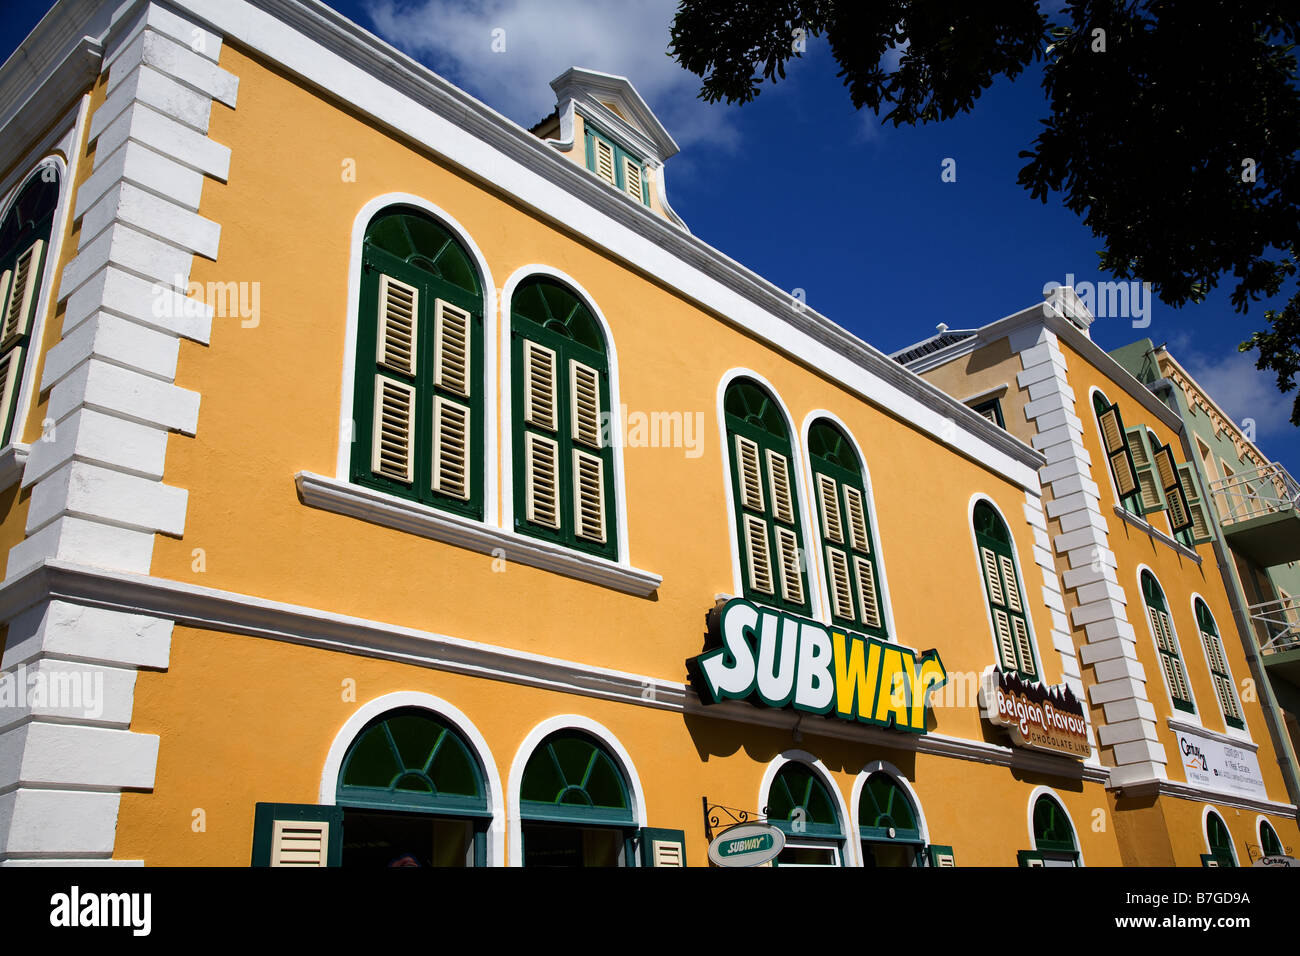 Subway eating house, Willemstad, Curacao Stock Photo